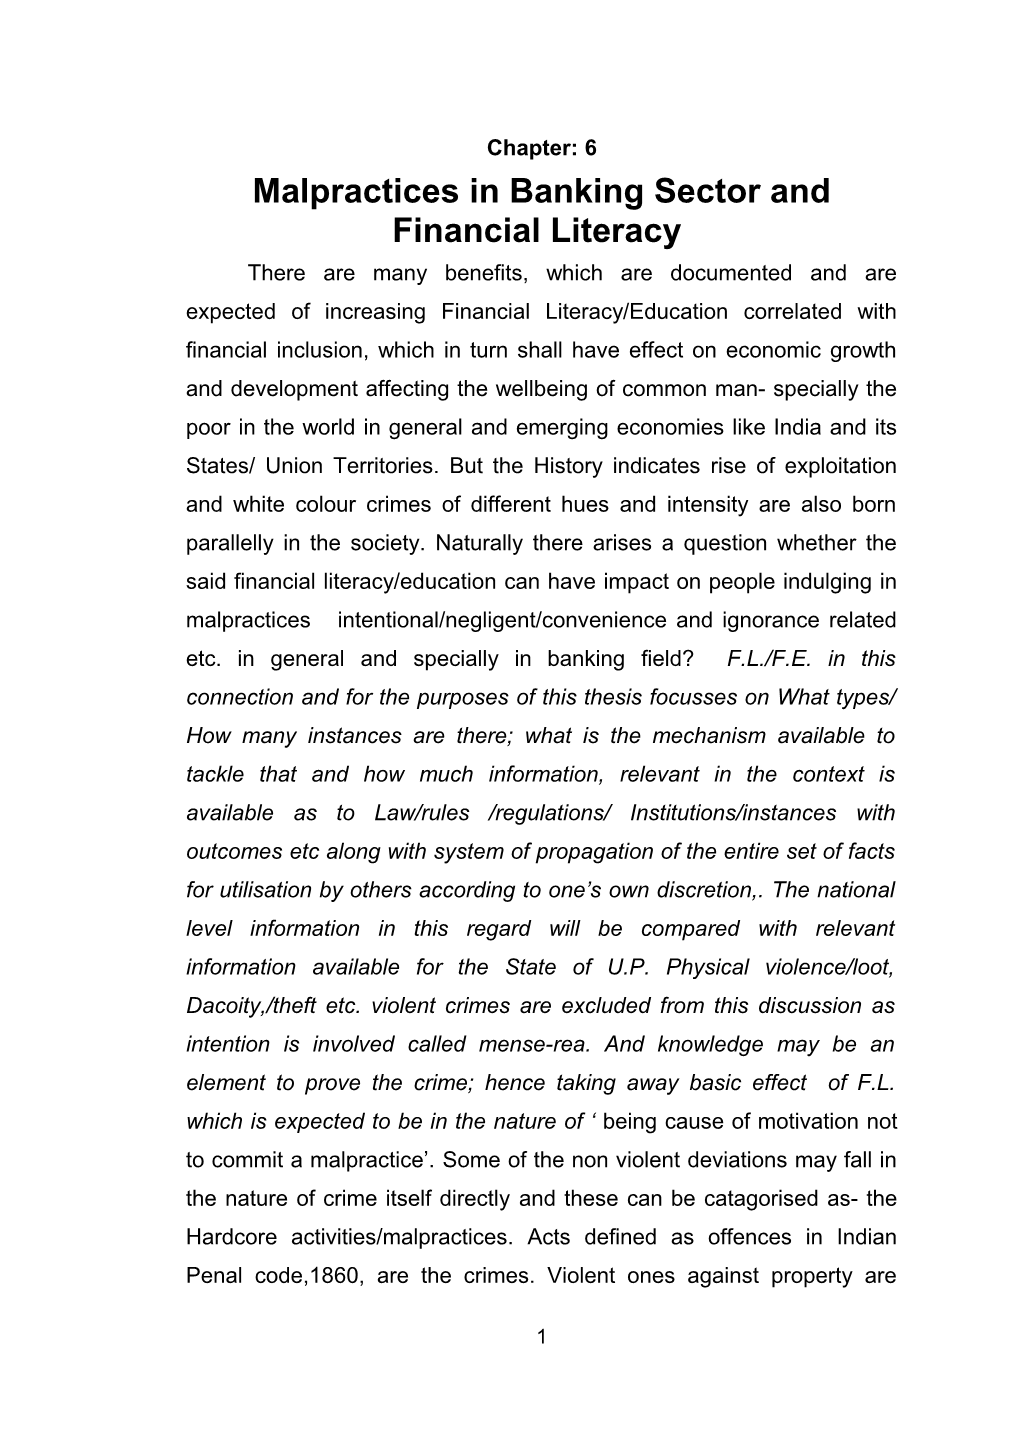 Malpractices in Banking Sector and Financial Literacy